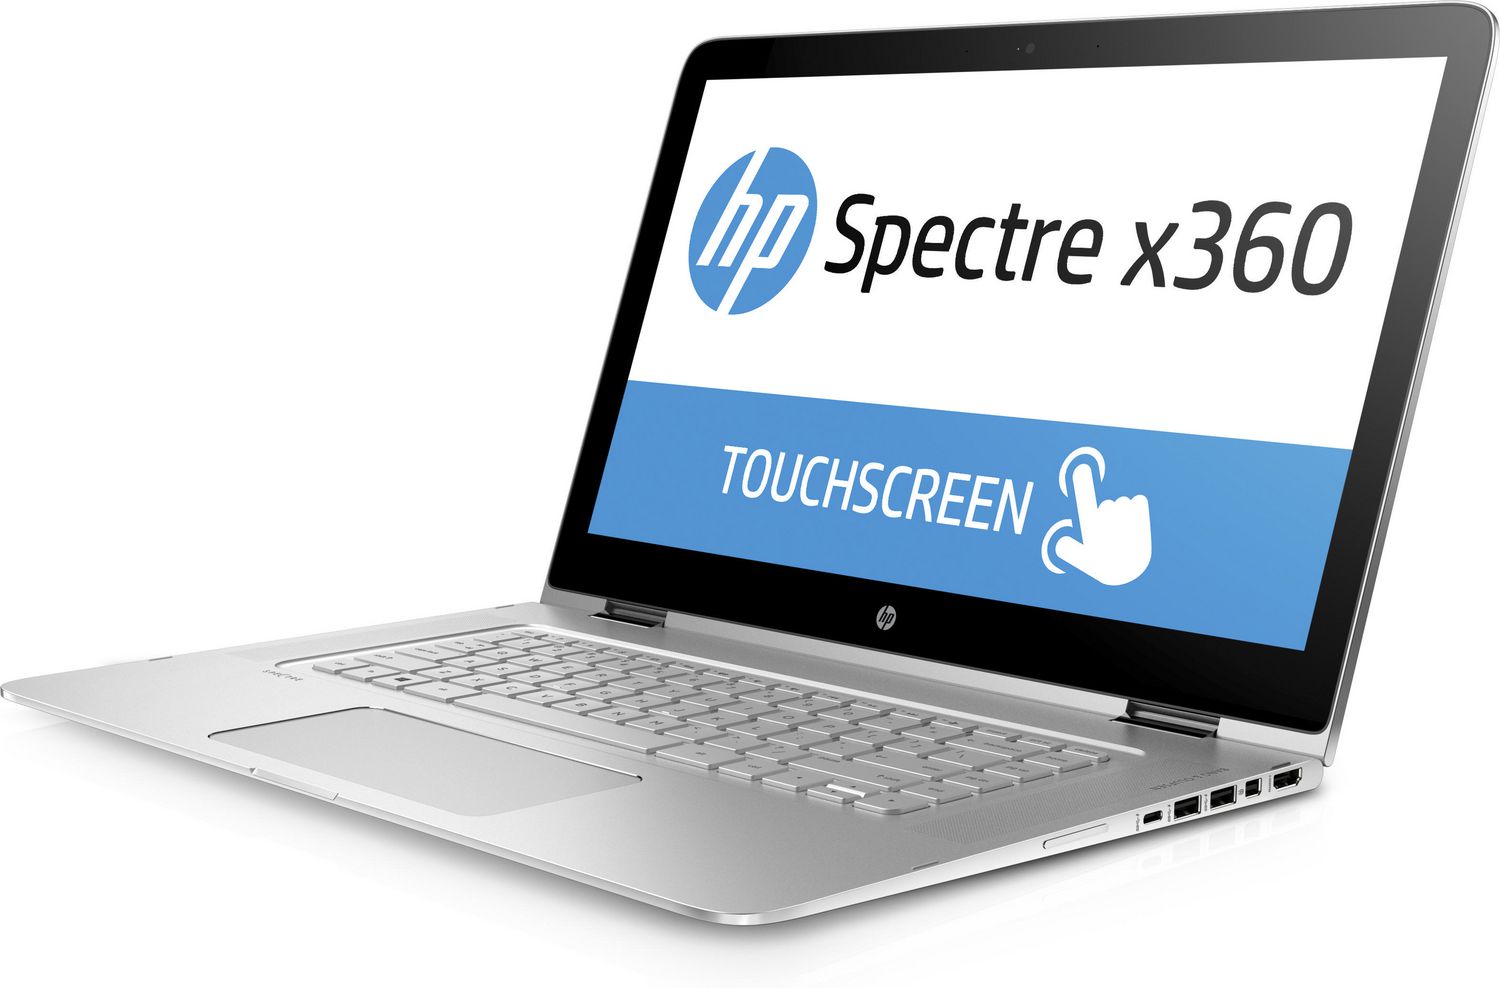 HP Spectre x360 15.6" Notebook with Intel Core i5-6200U 2.30GHz